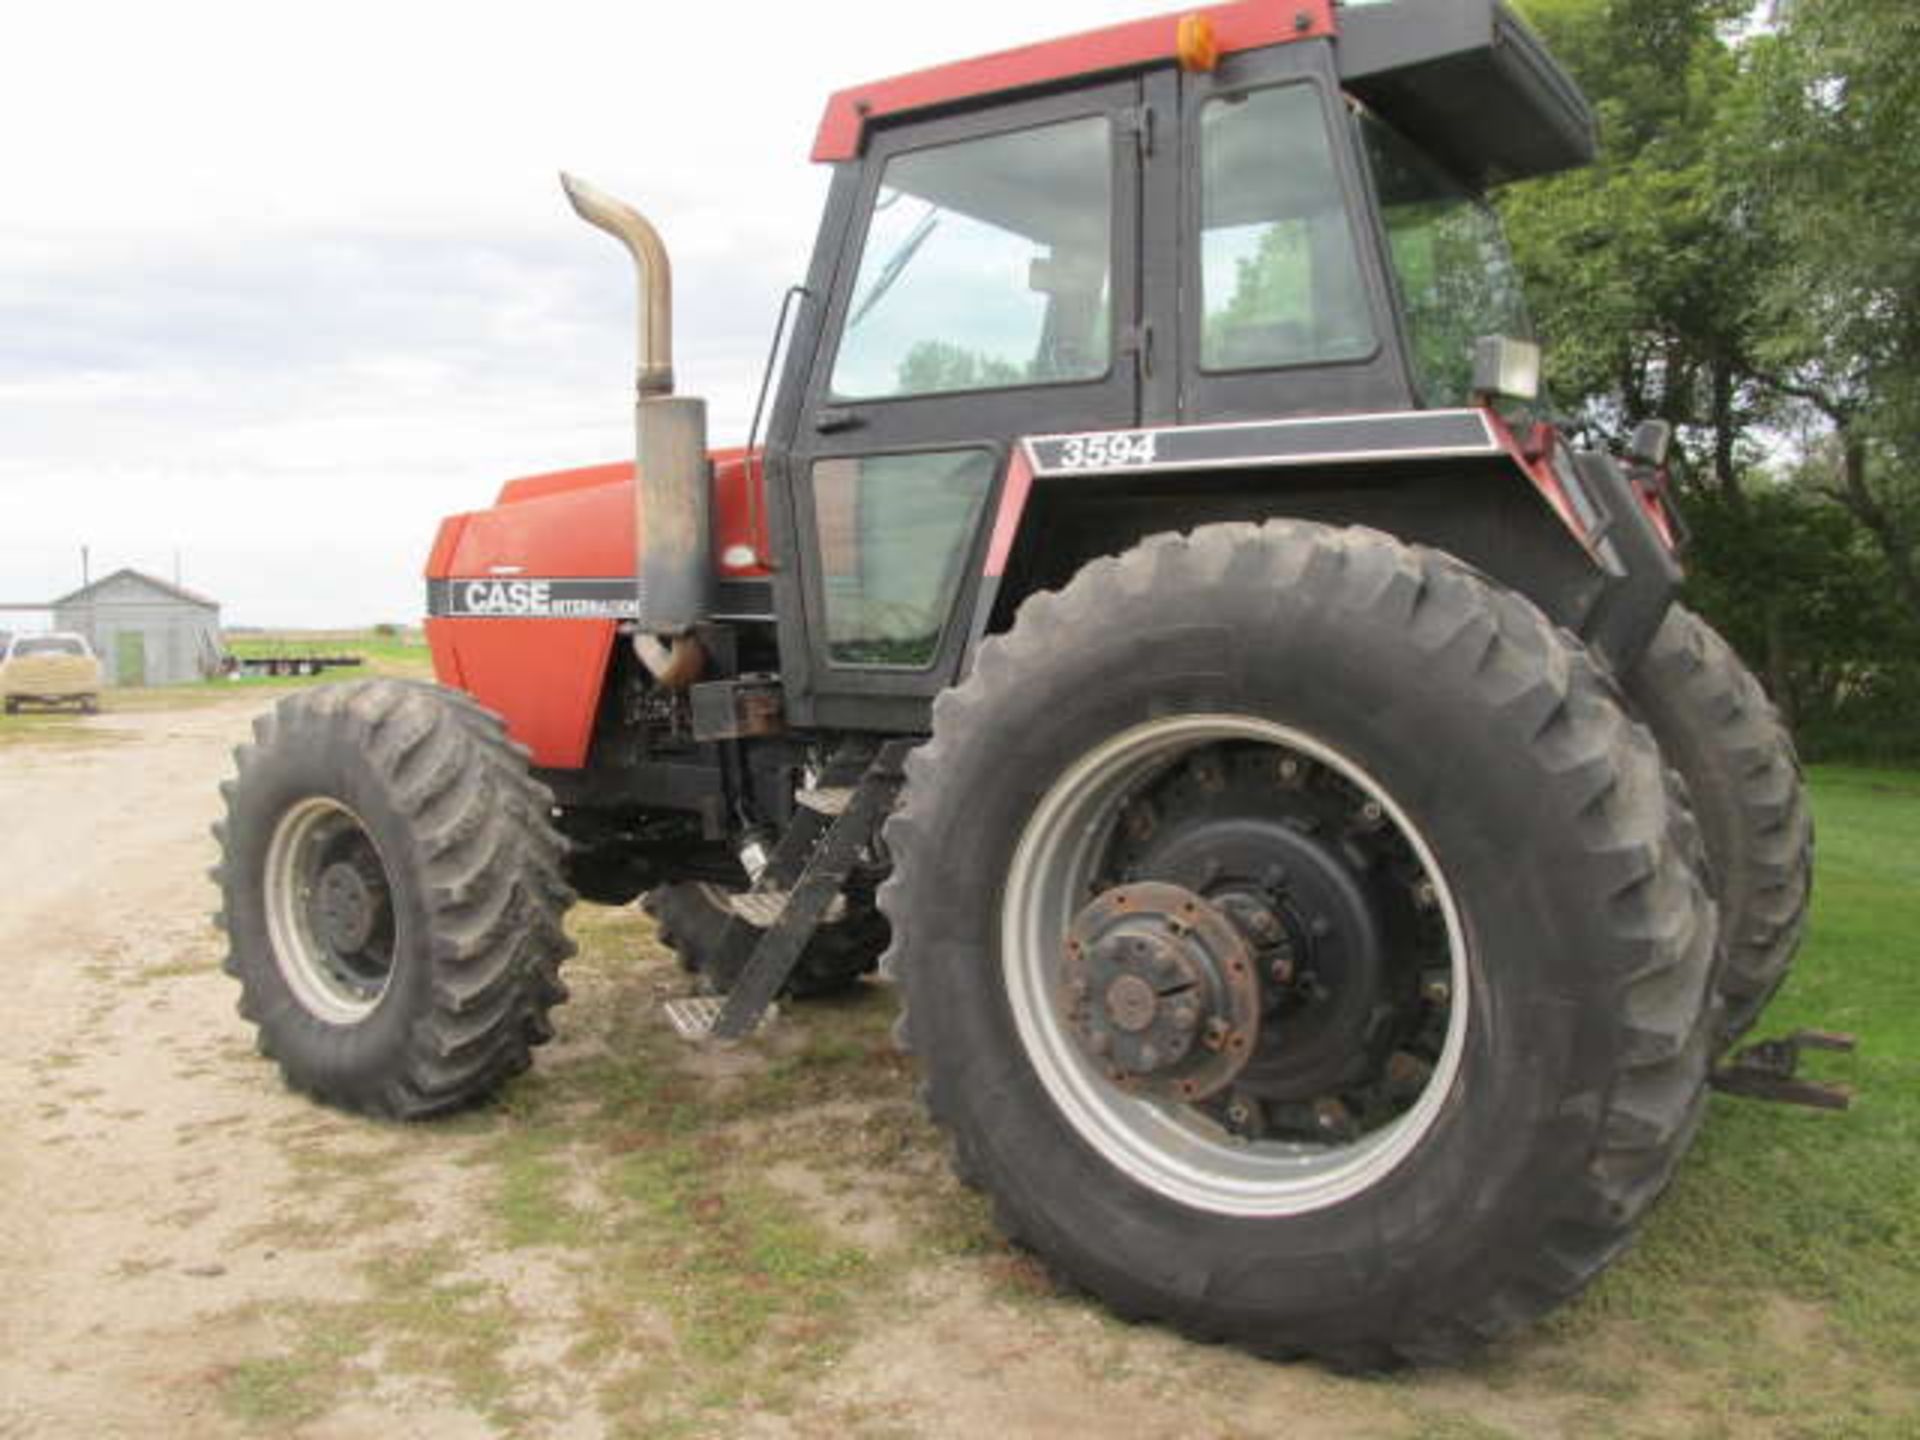 CASE IH 3594 FWA TRACTOR; 5830 Hours, Powershift, 3 Hydraulics, 20.8-38 Duals, SN.9947846-1987 - Image 4 of 6